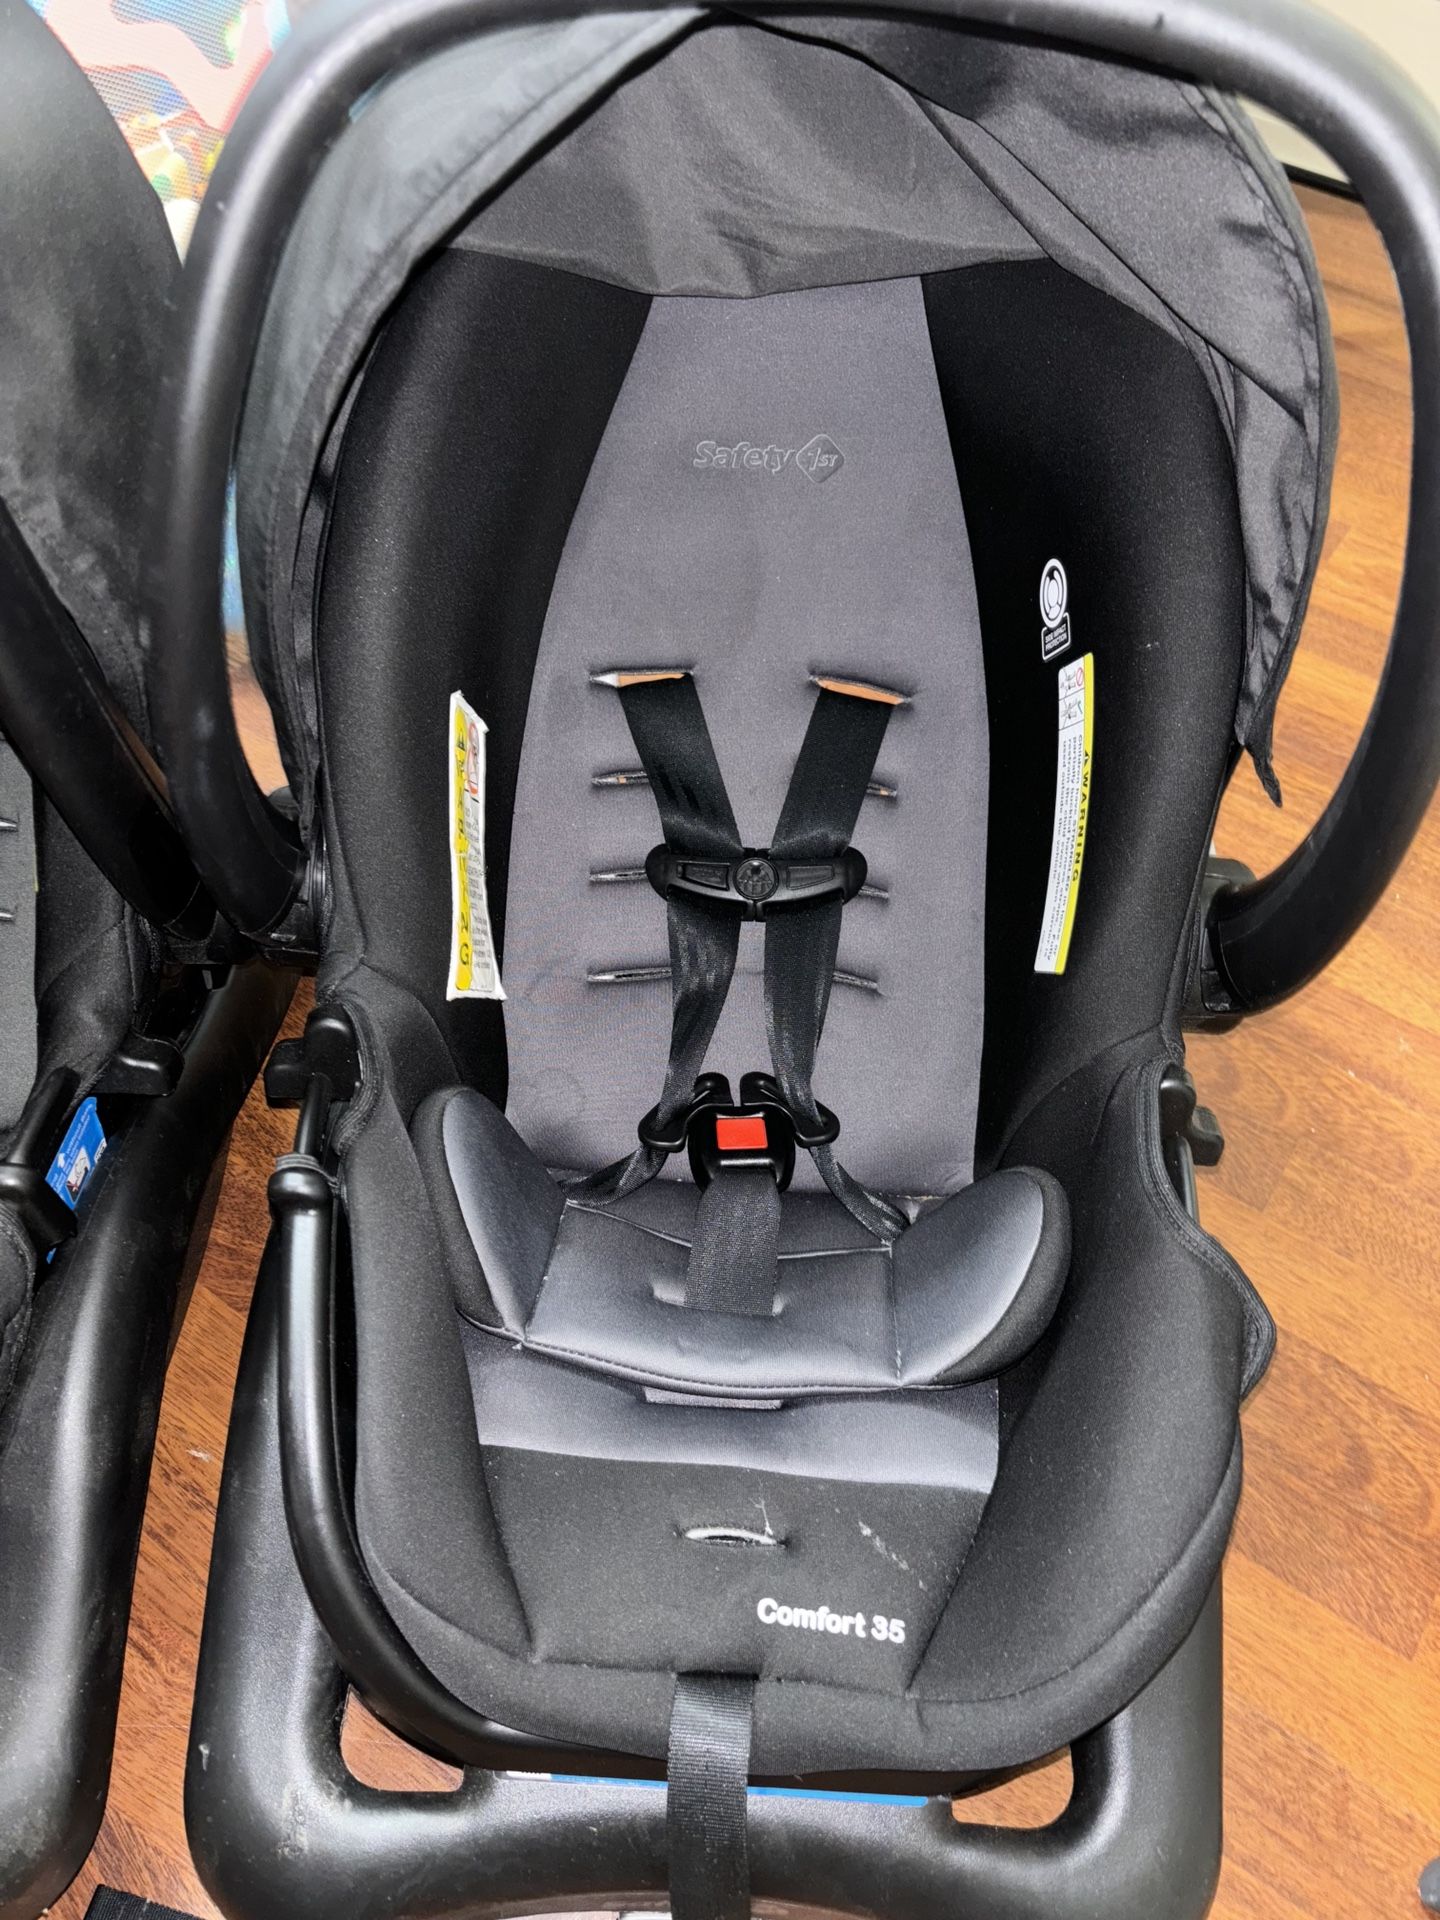 Safety 1st Baby Car Seat 